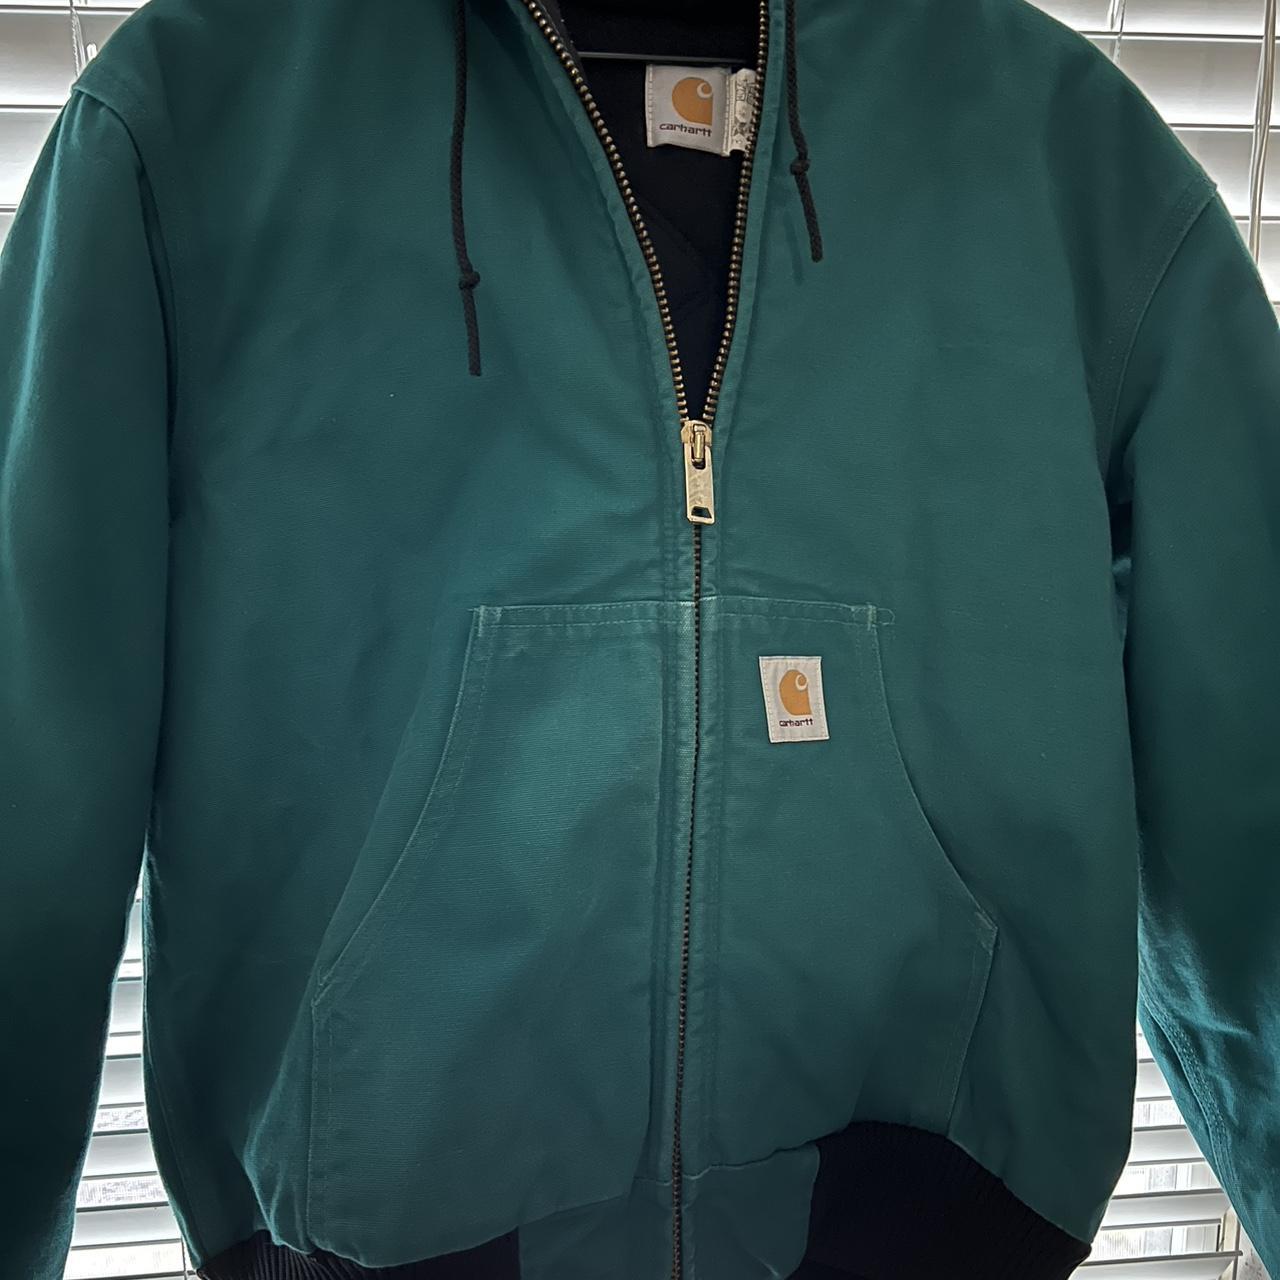 Rare Teal CH Jacket Hoodie Size M No rips or tears. - Depop